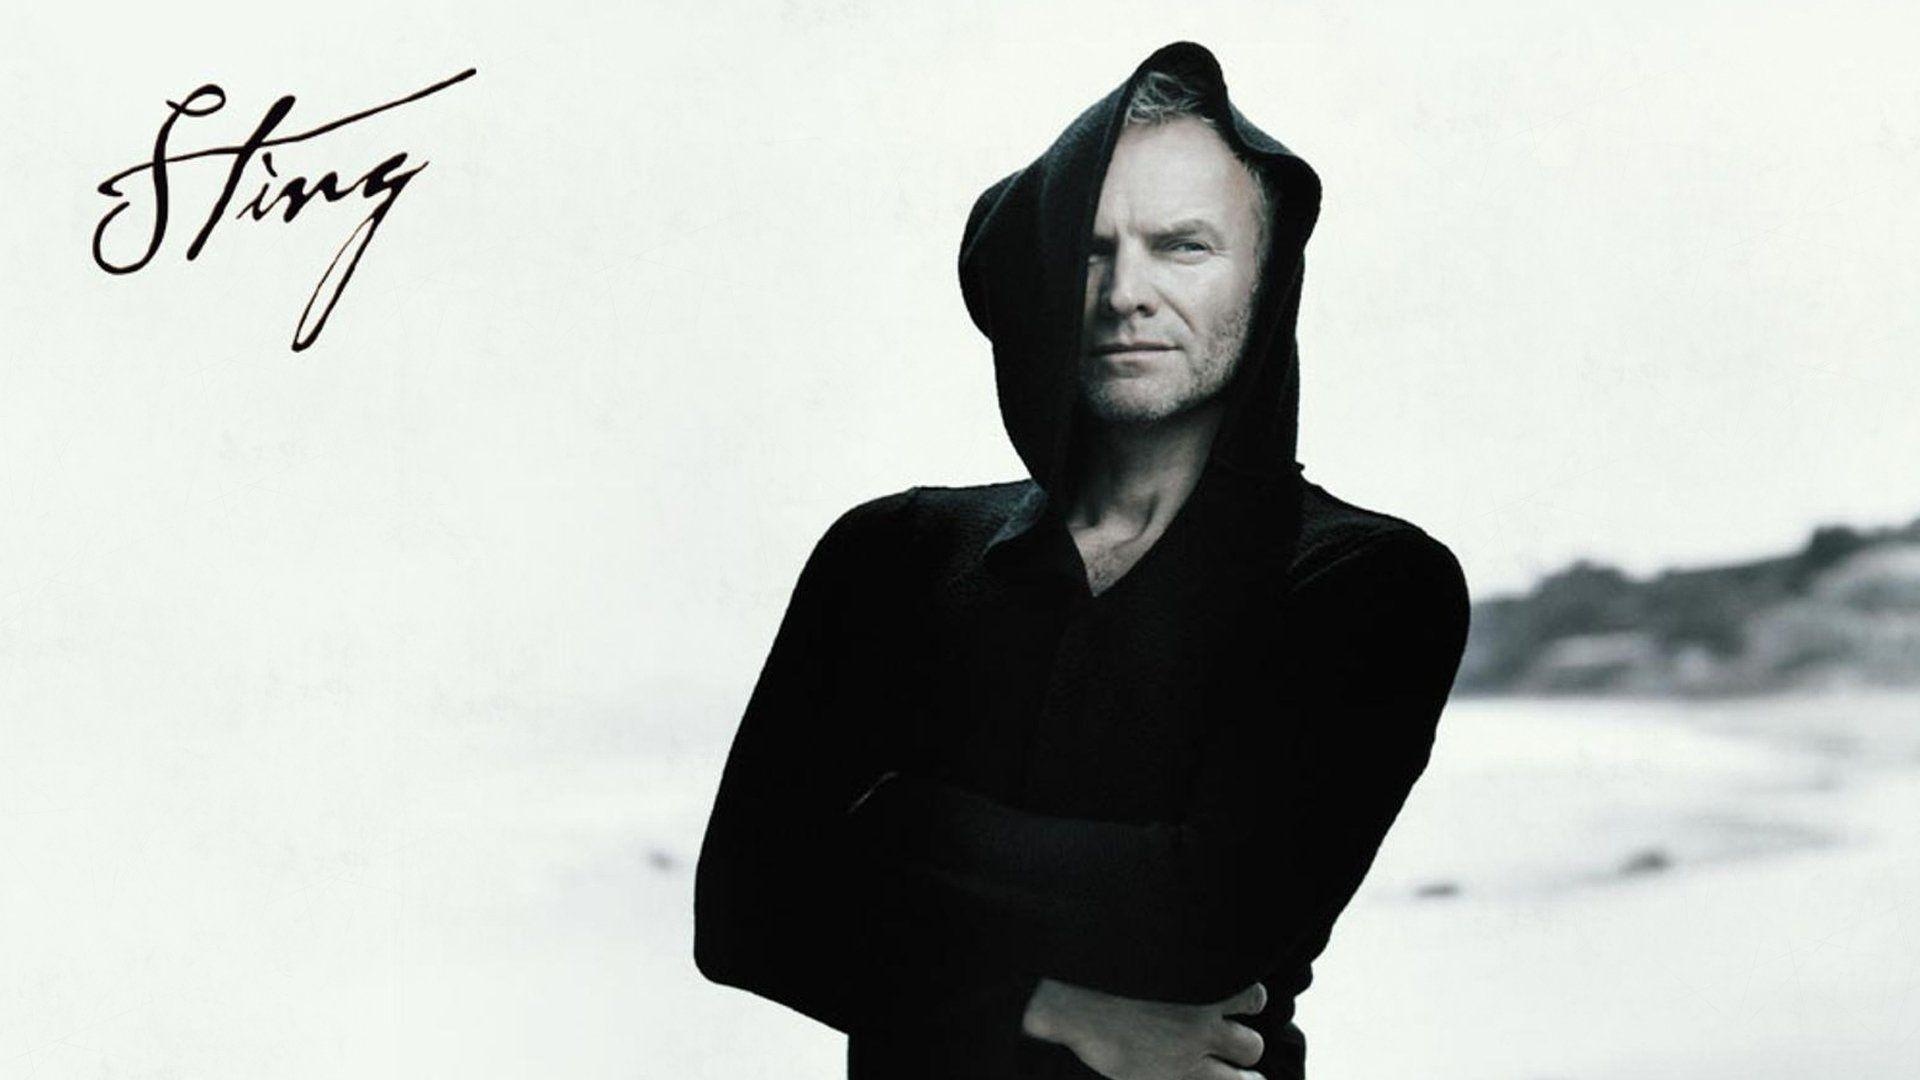 Sting, Musician wallpapers, Ethan Tremblay's collection, 1920x1080 Full HD Desktop